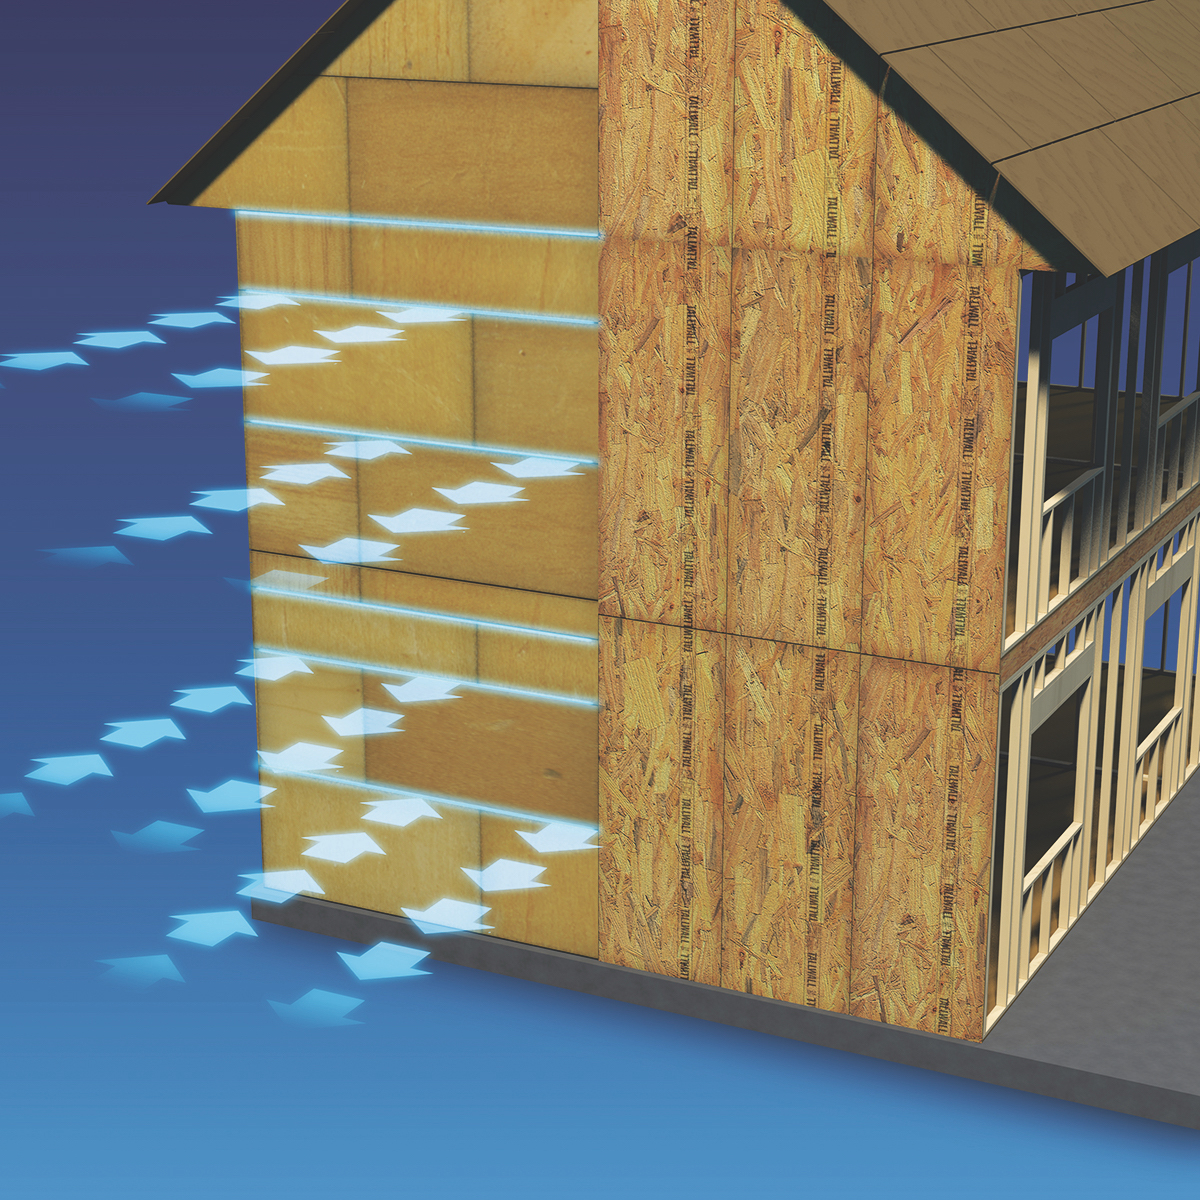 MC Norbord is a manufacturer of wood-based panels used for roof and wall sheathing, subfloors, and stairs